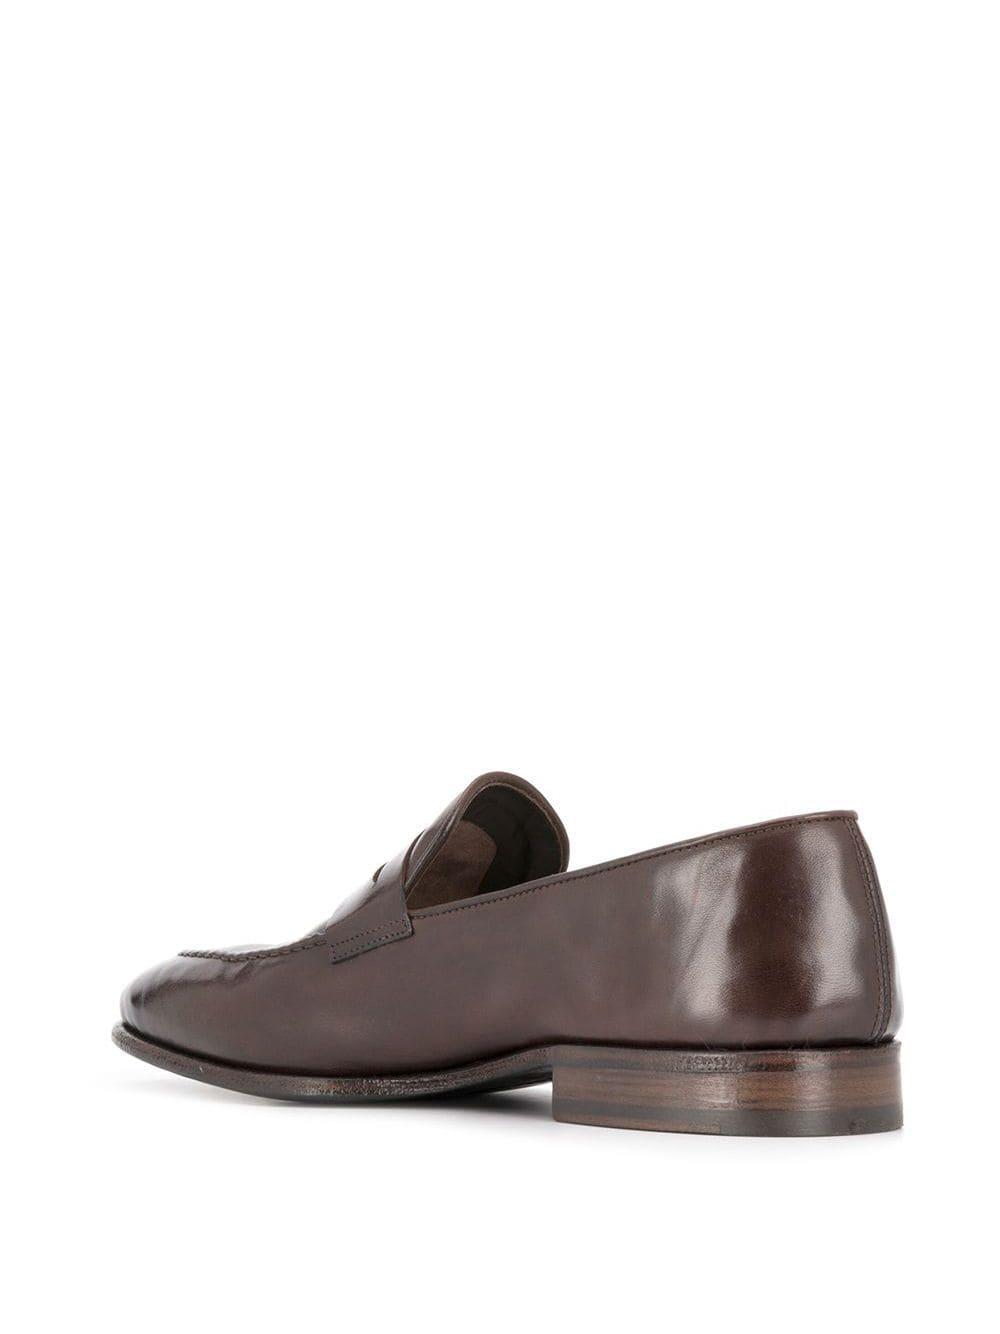 Alberto Fasciani Leather Weathered Penny Loafers in Brown for Men - Lyst